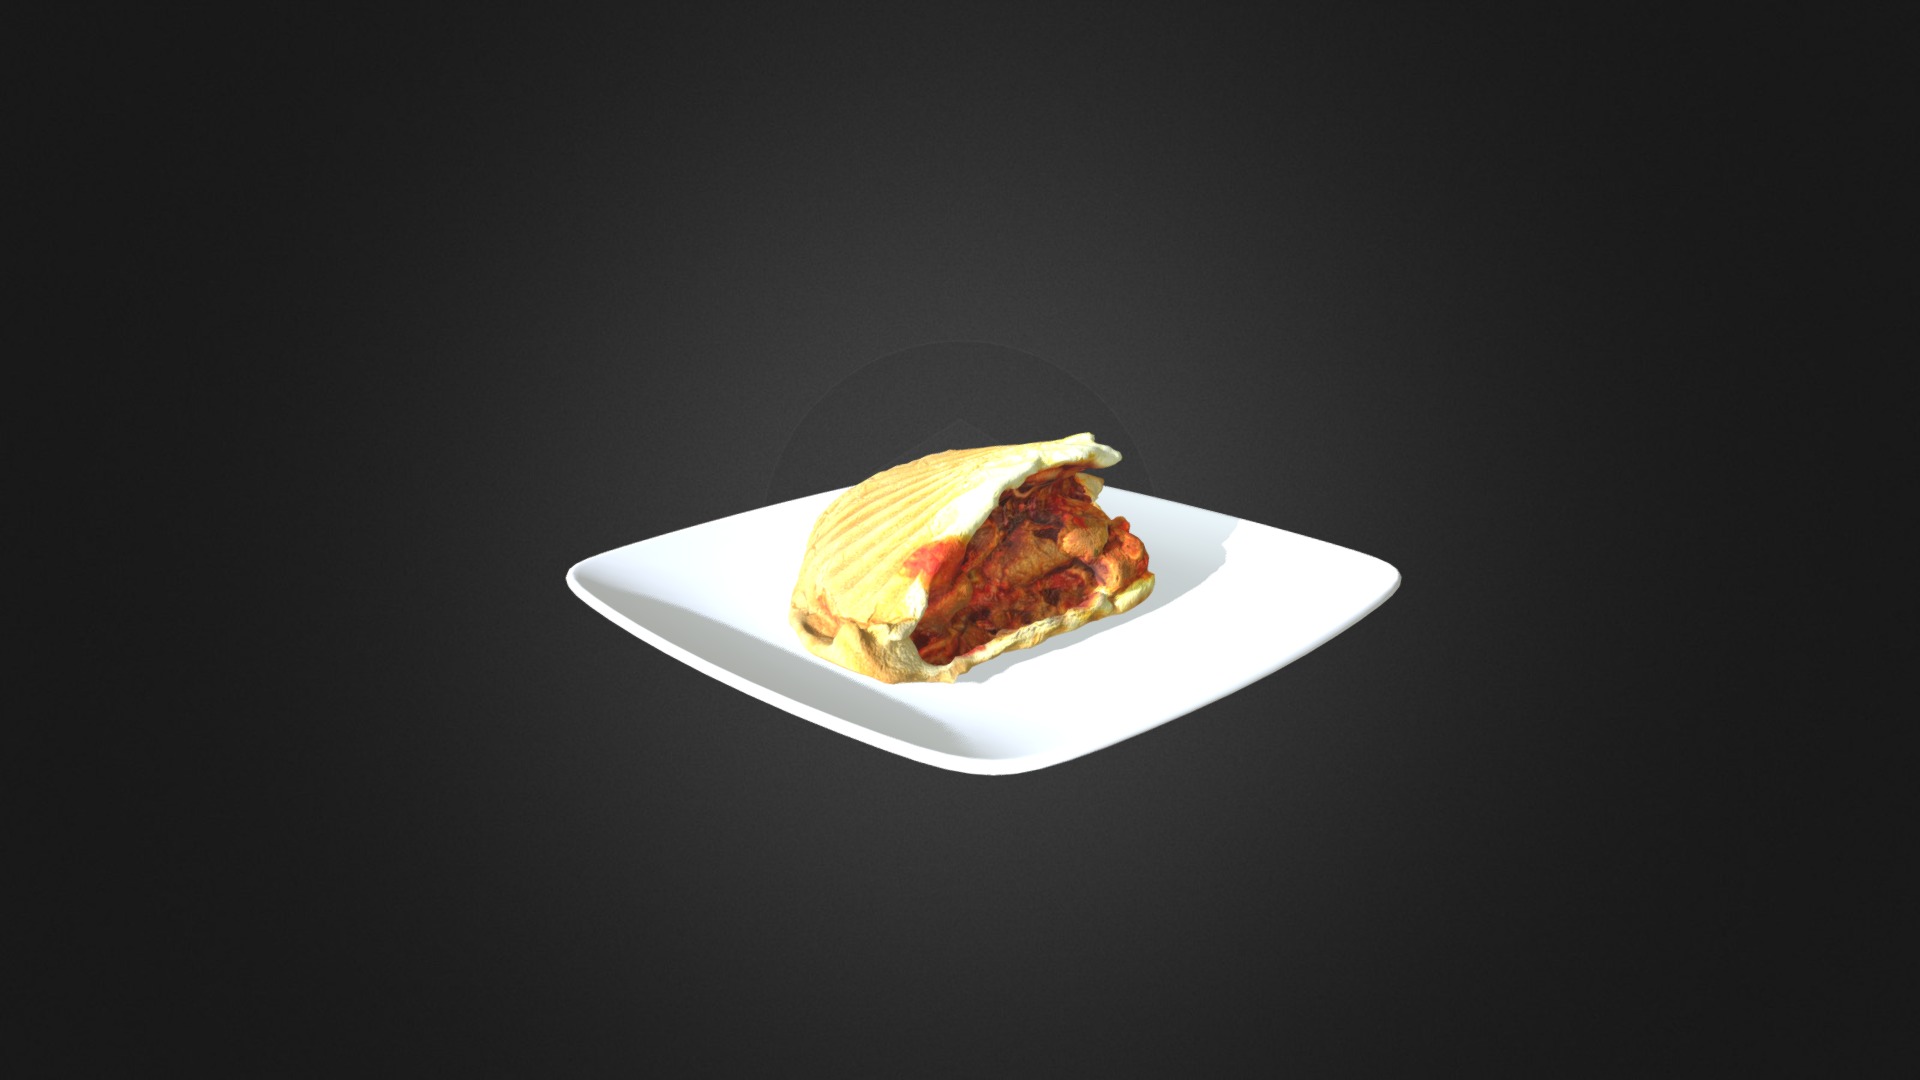 3D model Bitten doner kebab - This is a 3D model of the Bitten doner kebab. The 3D model is about a piece of food on a plate.